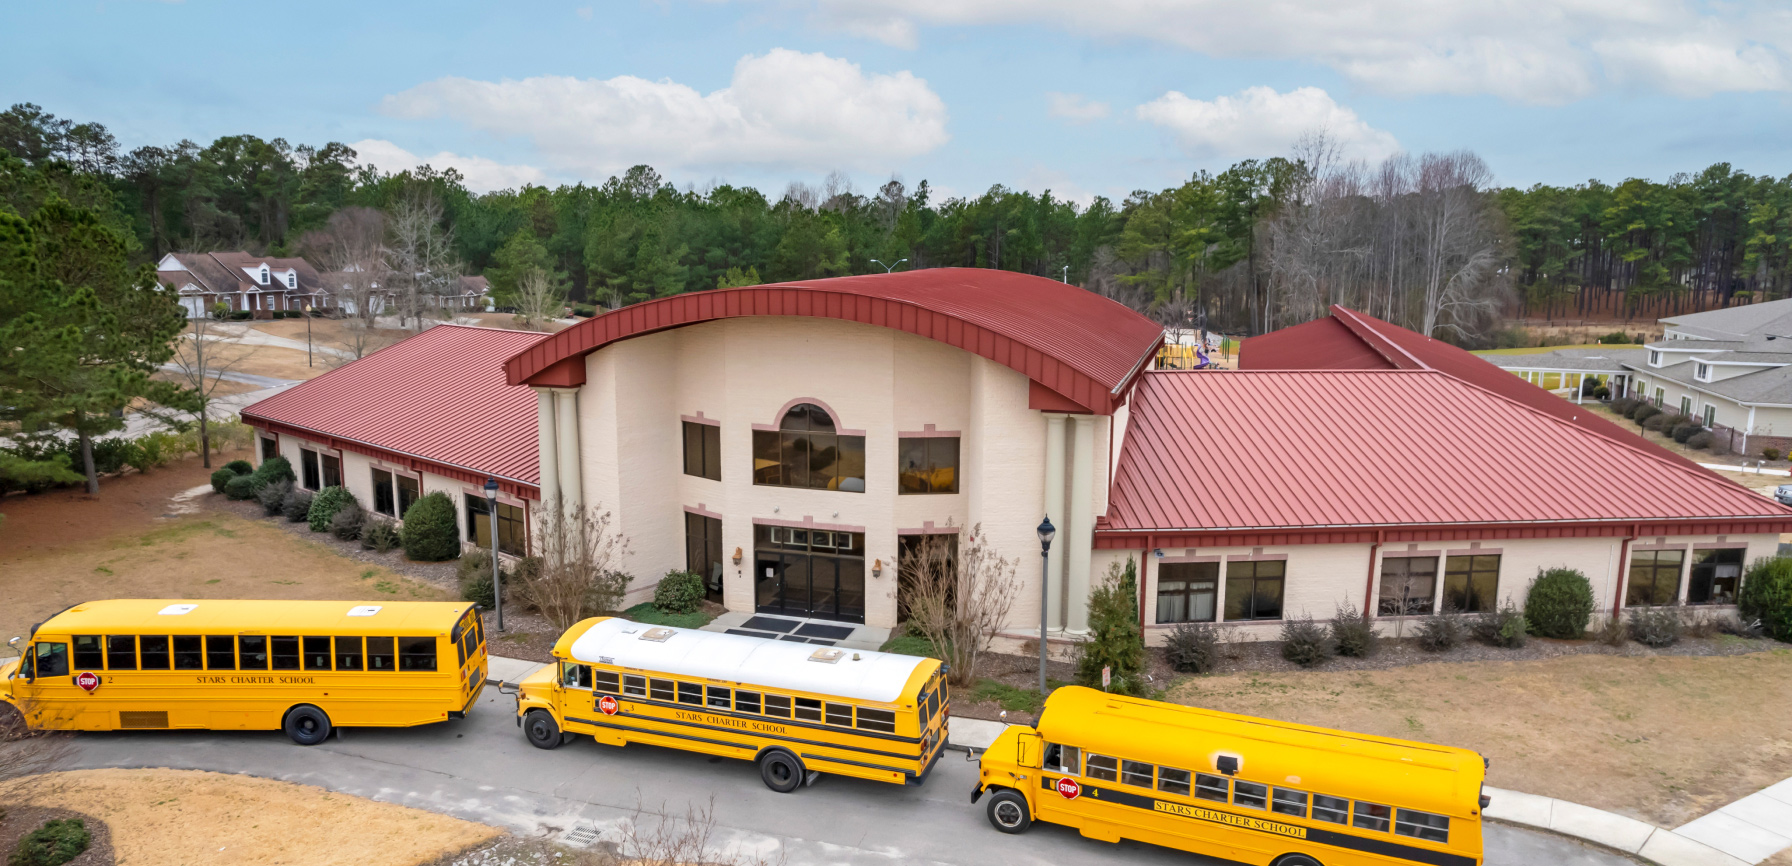 Yellow buses lined up in front of large school building